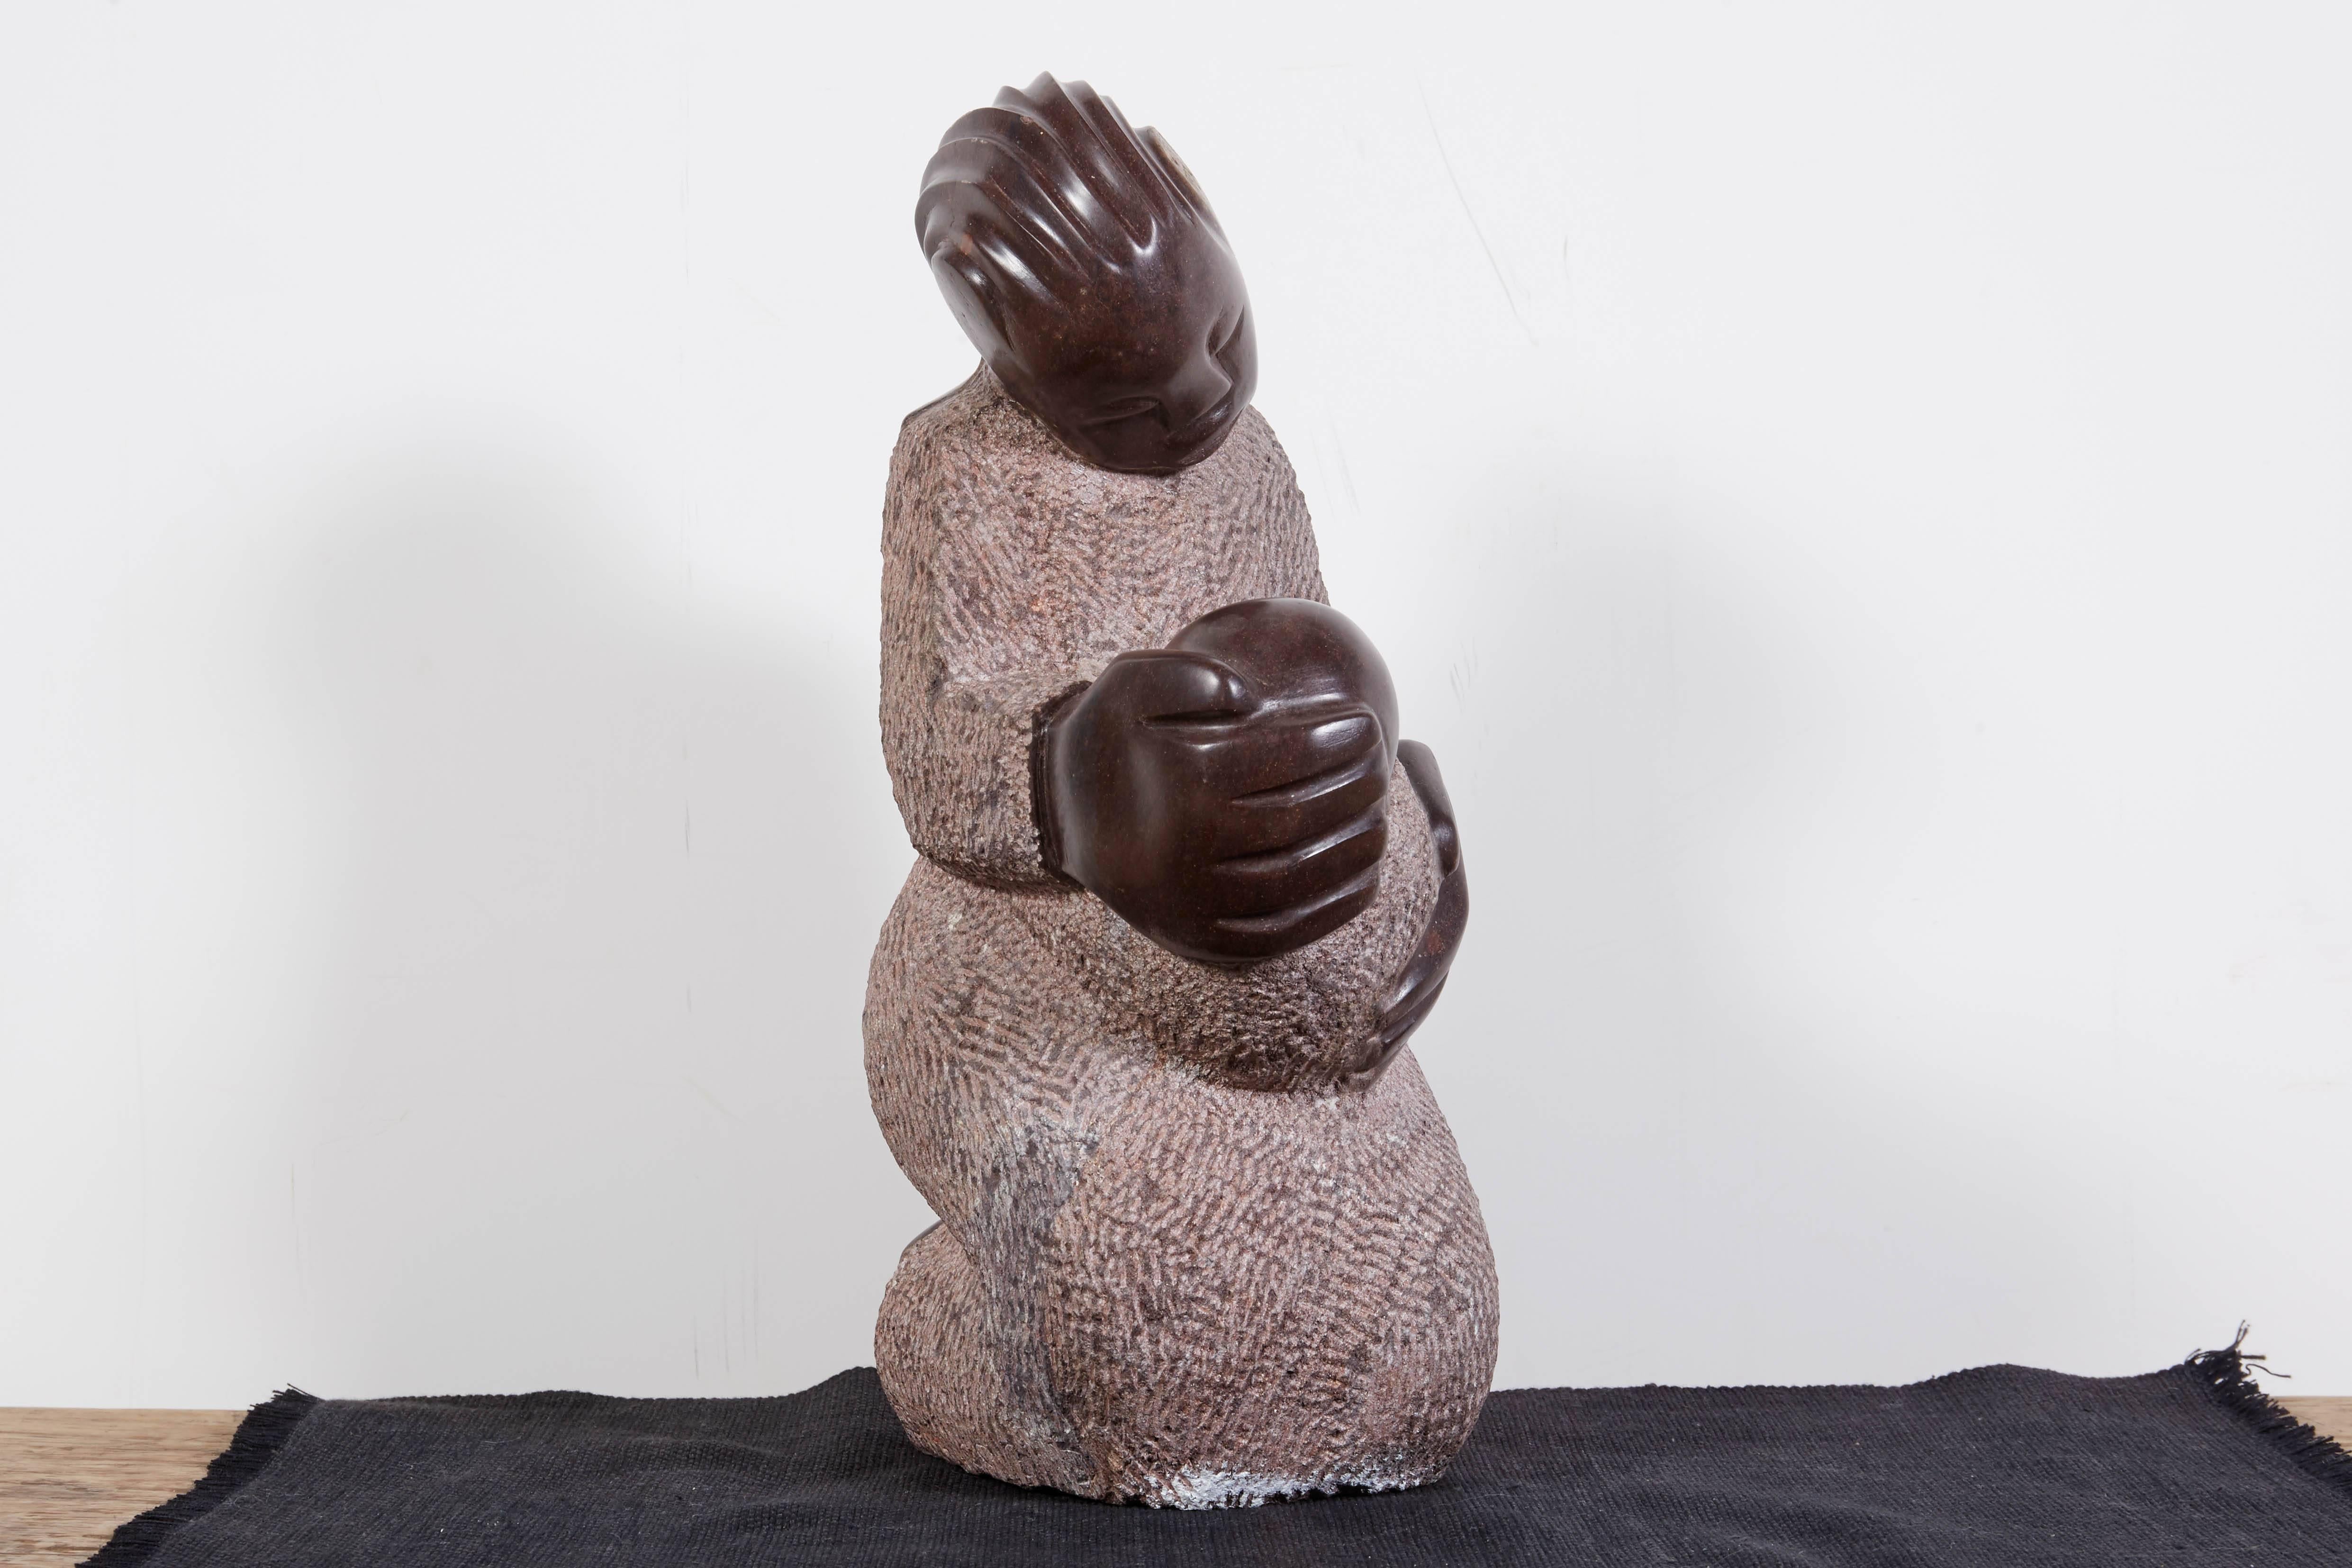 A beautifully carved stone Shona sculpture from Zimbabwe depicting a mother tenderly cradling her child. A simple and moving piece by the artist Tmuk. 
BH113.